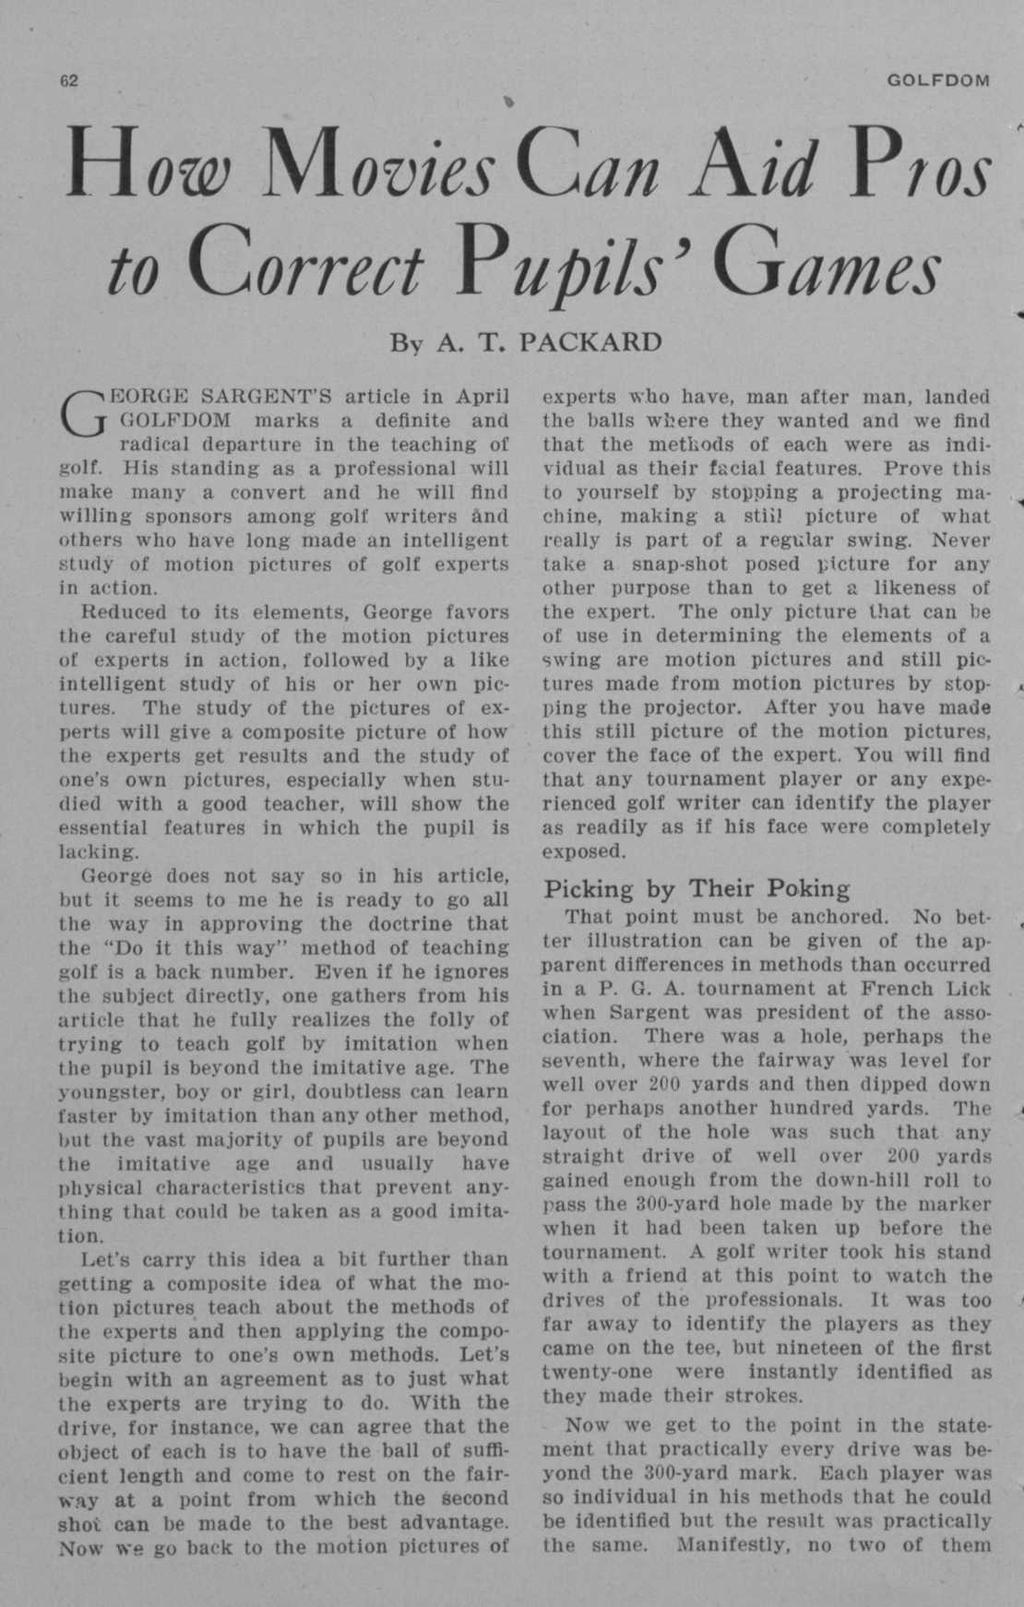 H OW M ovies Can Aid Pros to Correct Pupils' Games G By A. T. PACKARD EORGE SARGENT'S article in April GOLFDOM marks a definite and radical departure in the teaching of golf.